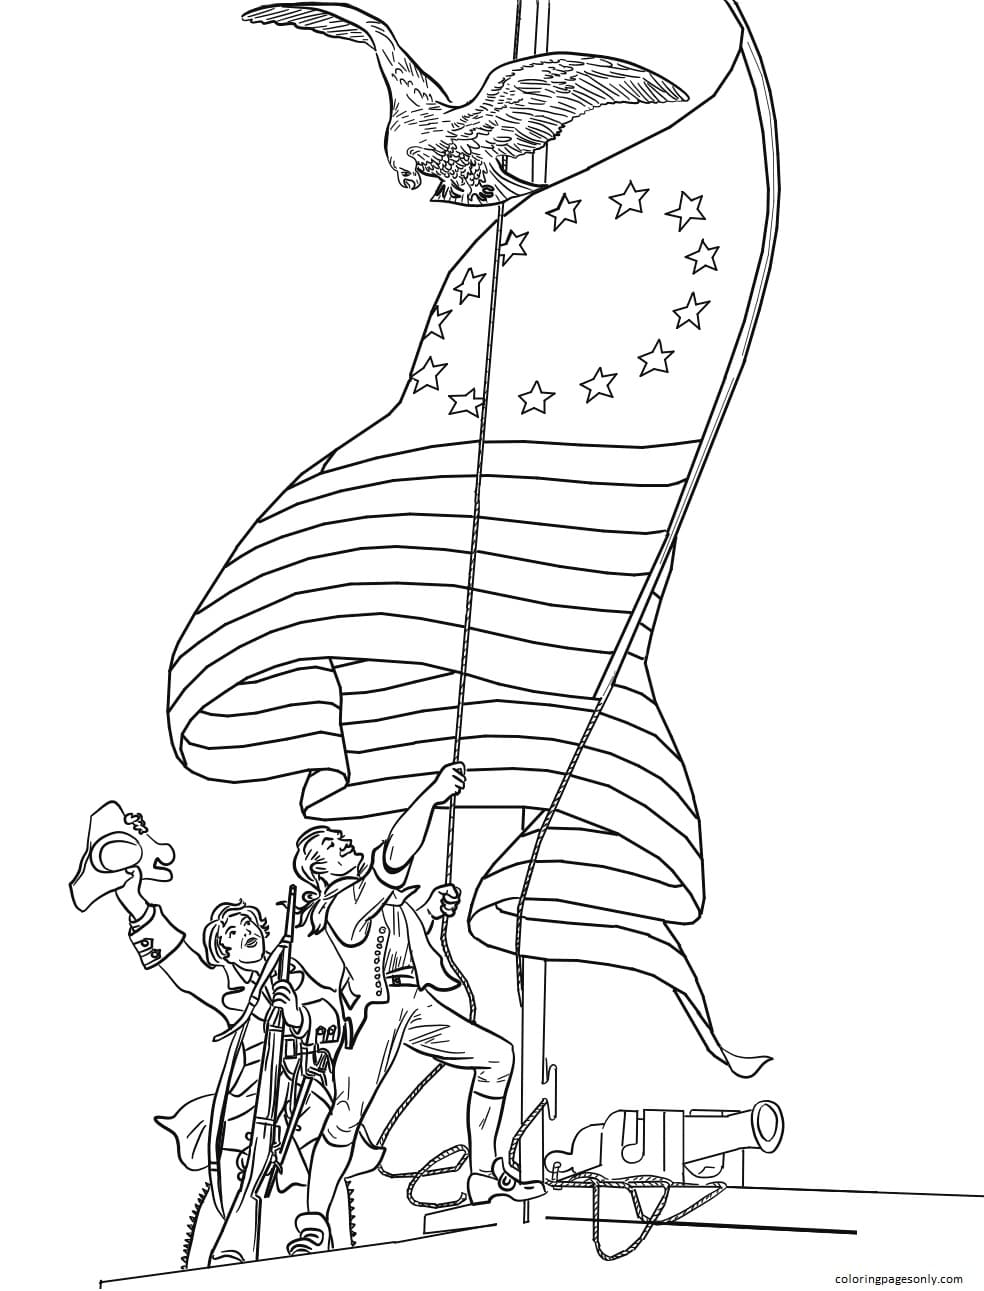 Patriots Raising An American Flag Coloring Pages